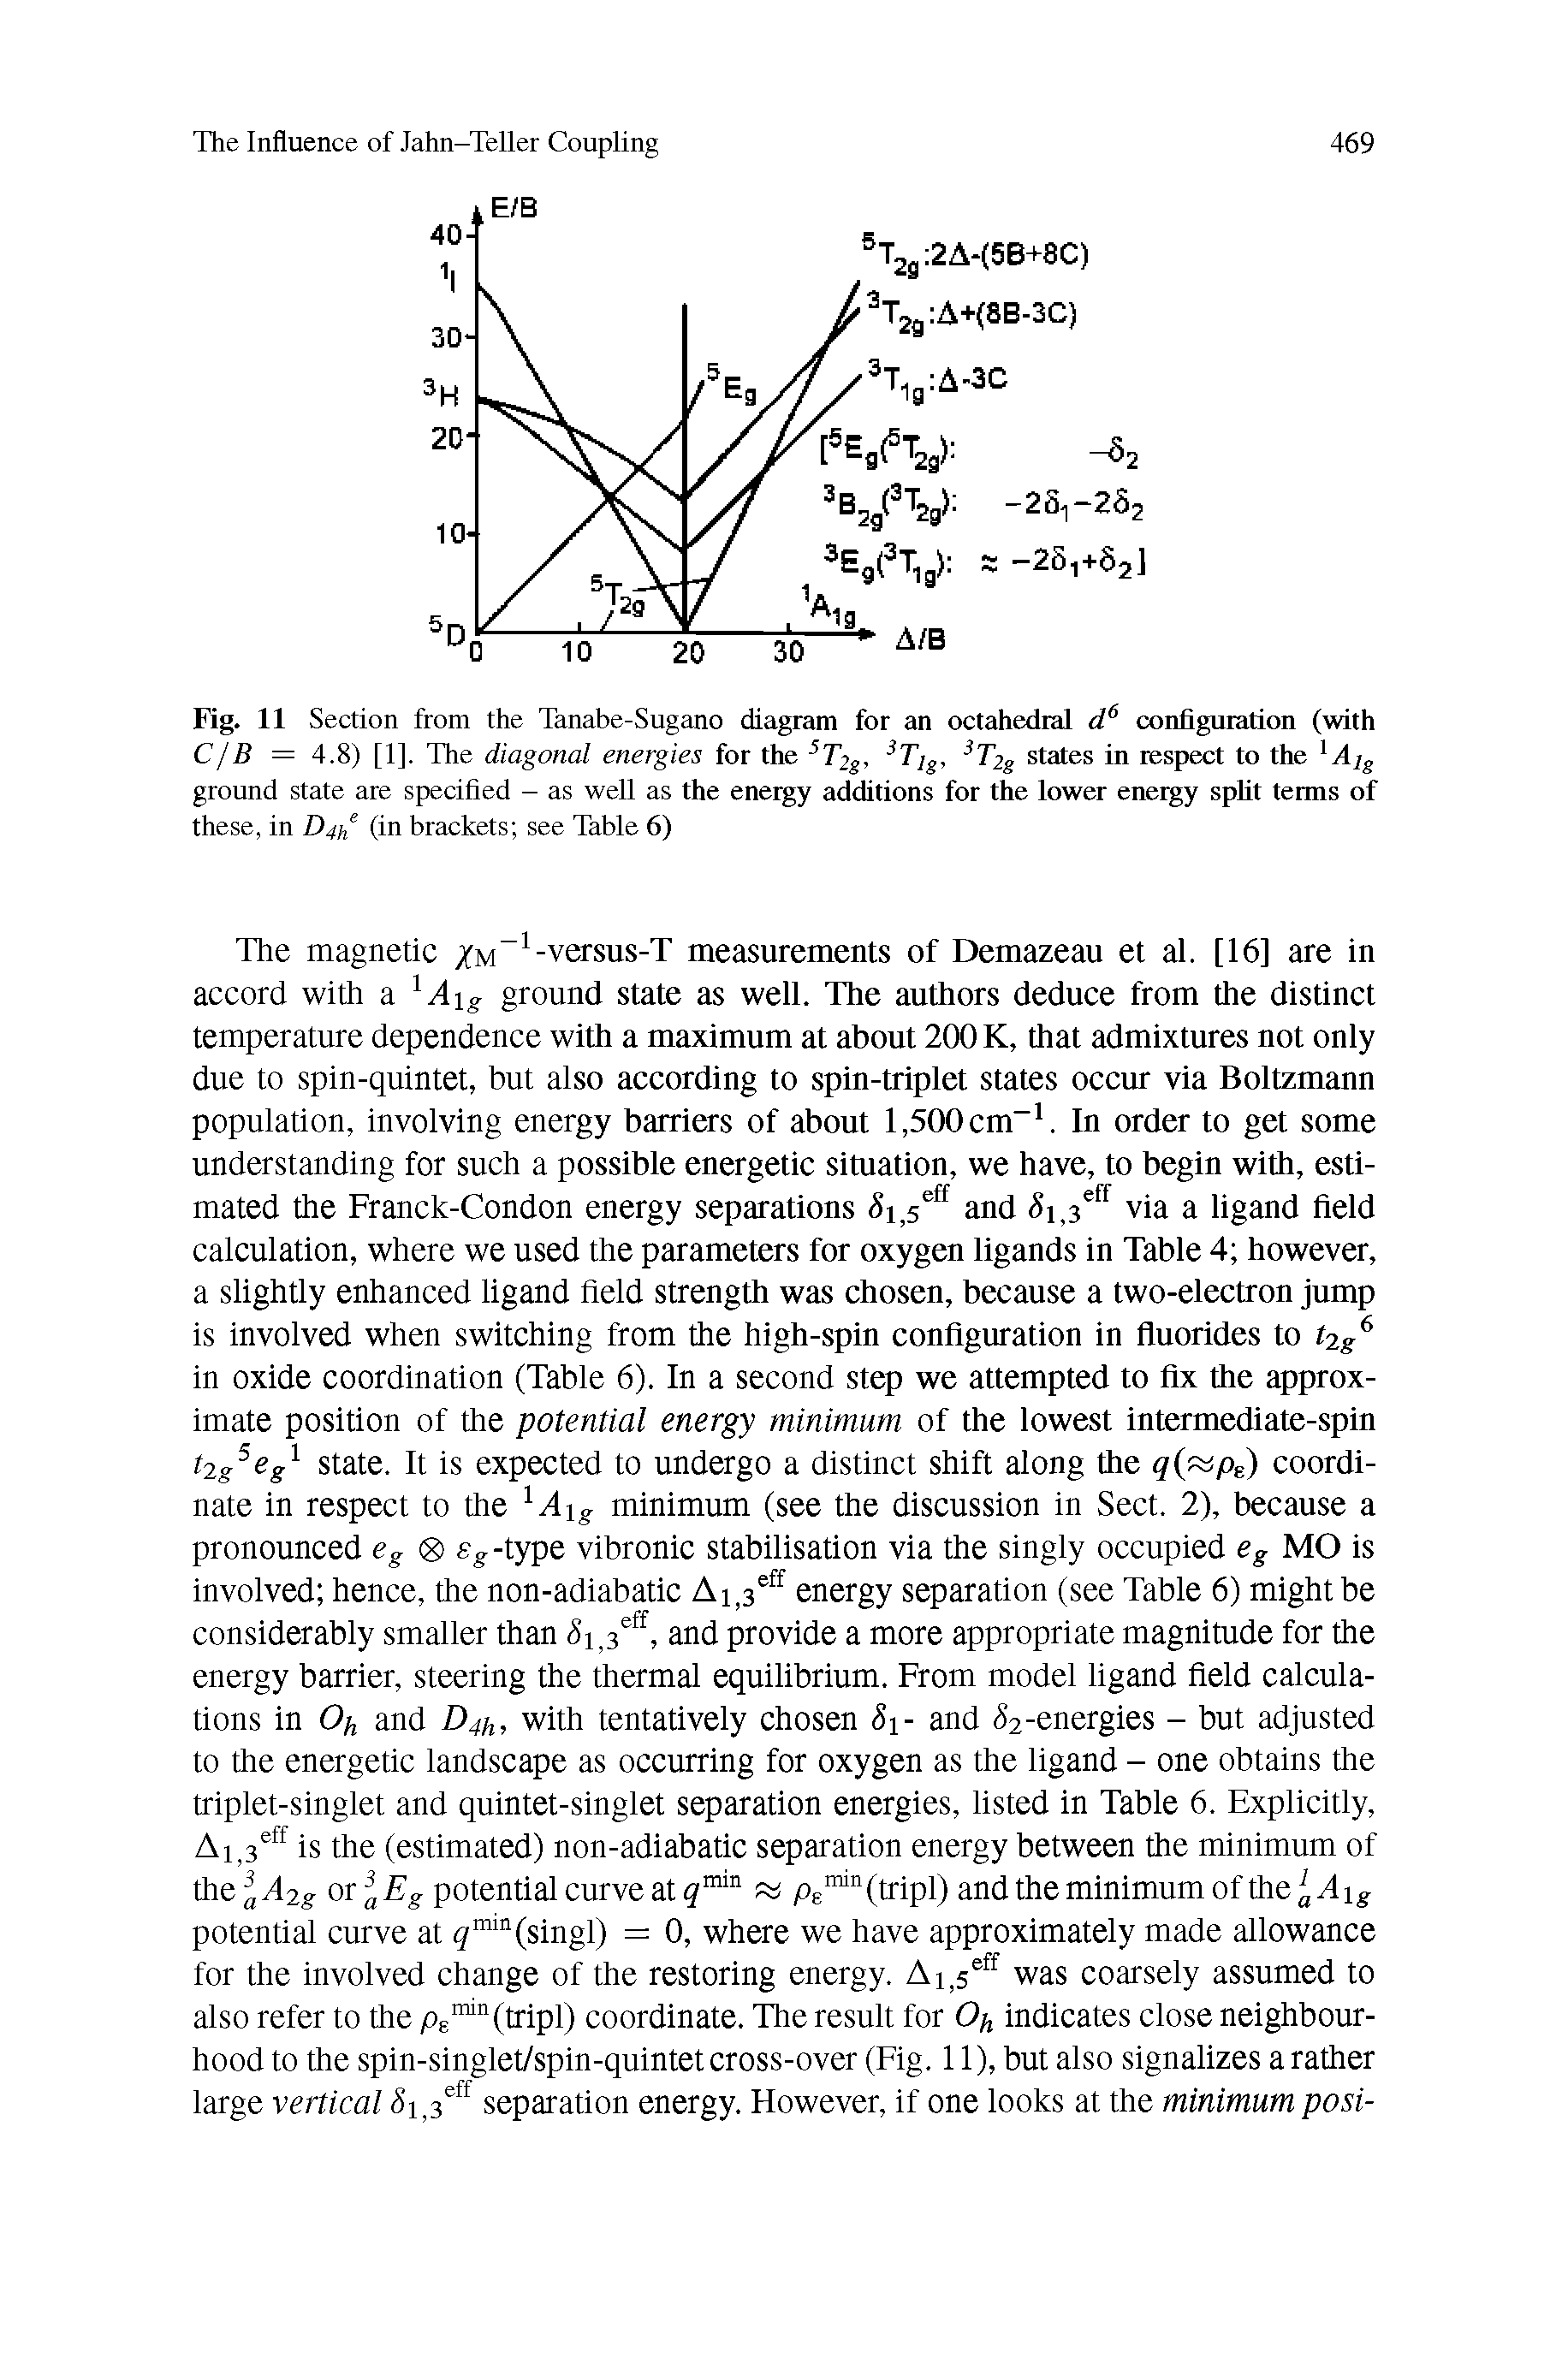 Fig. 11 Section from the Tanabe-Sugano diagram for an octahedral configuration (with C/B = 4.8) [1]. The diagonal energies for the T2g, T2g states in respect to the Ajg...